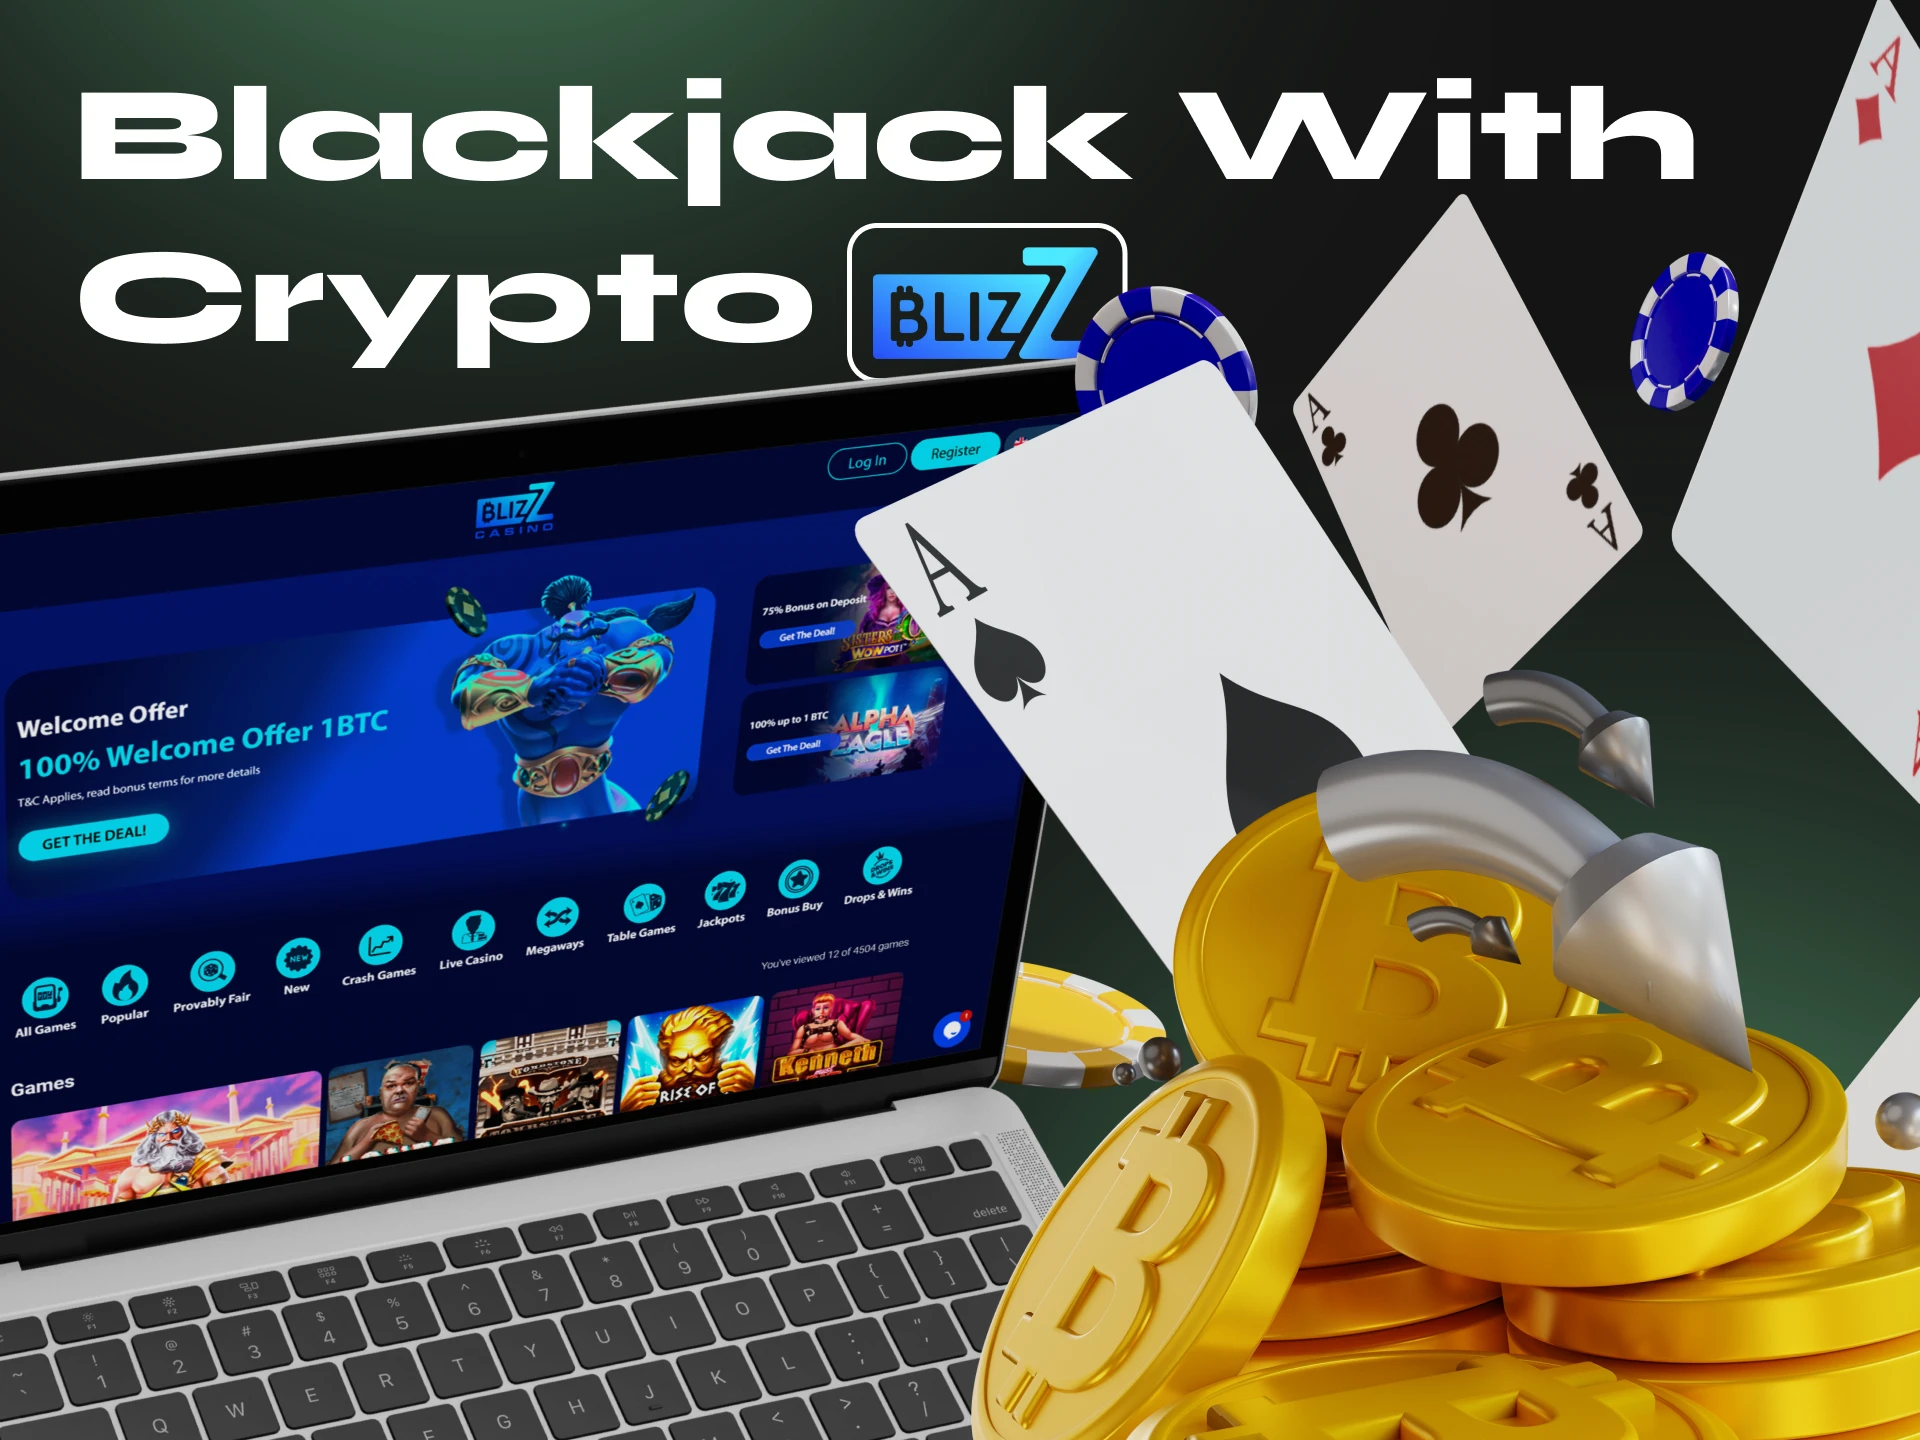 At Blizz Casino you can play blackjack using cryptocurrency.